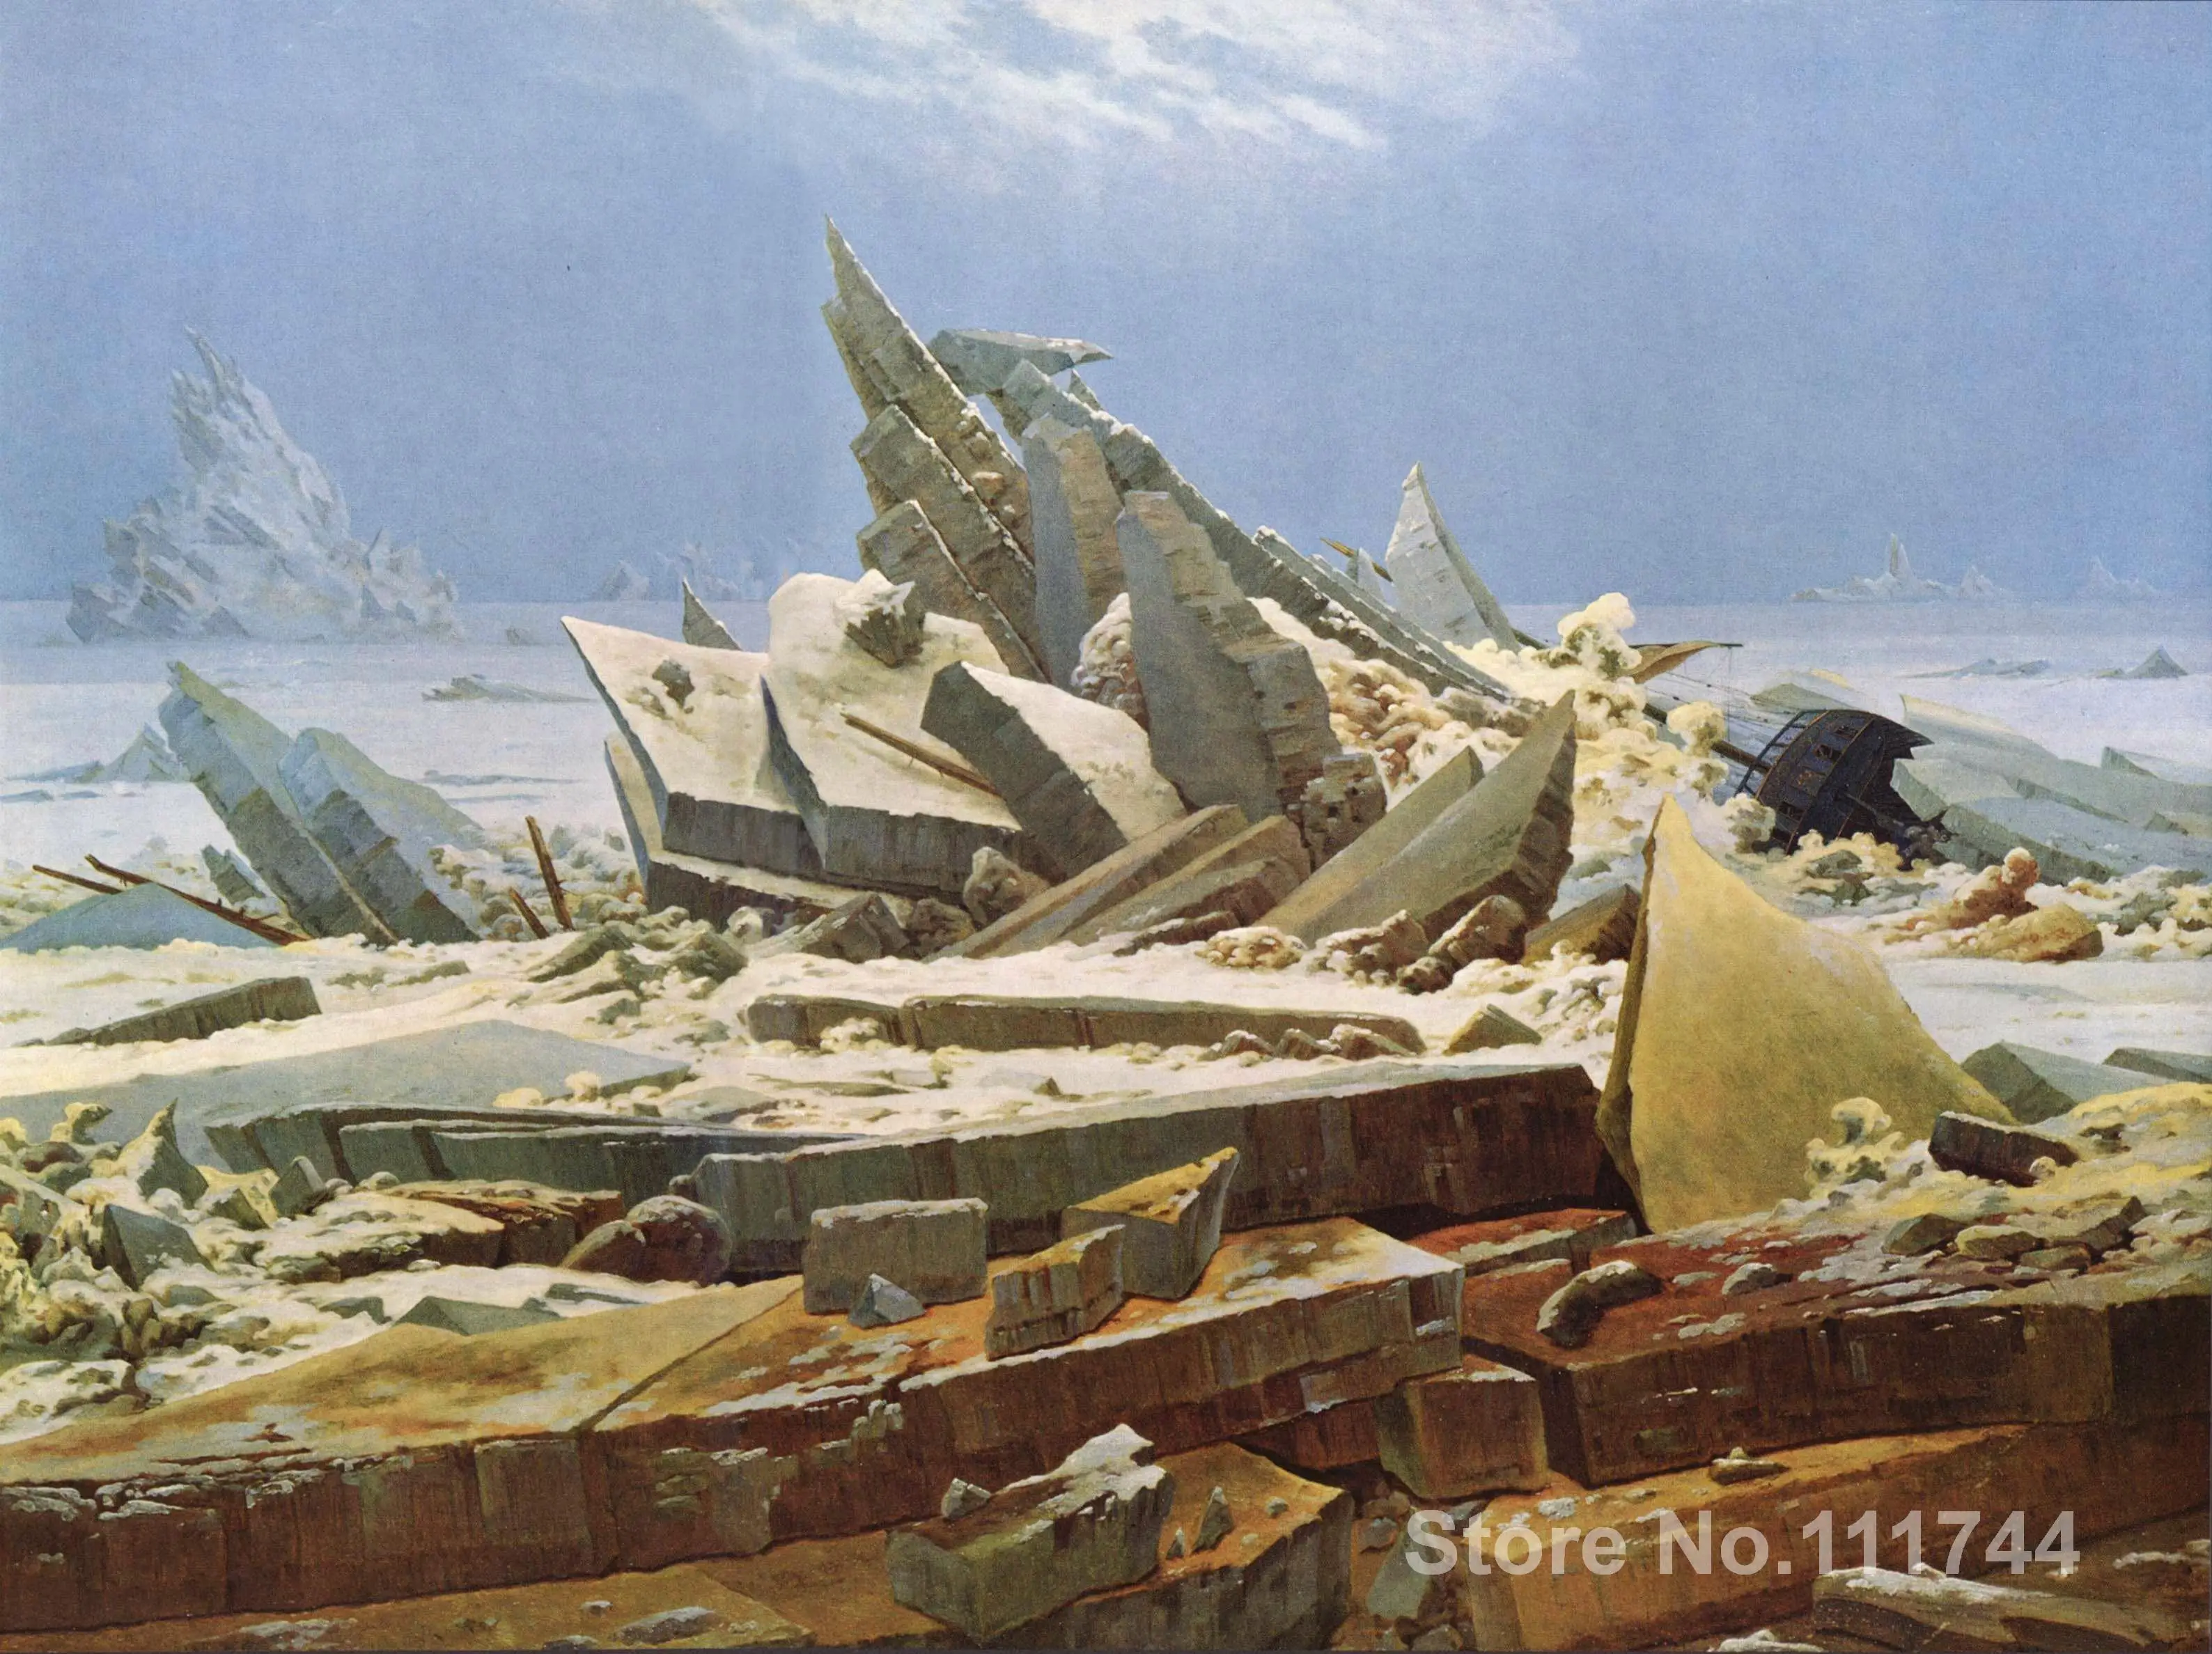 

The Sea of Ice Caspar David Friedrich Paintings for sale wall art High quality Hand painted